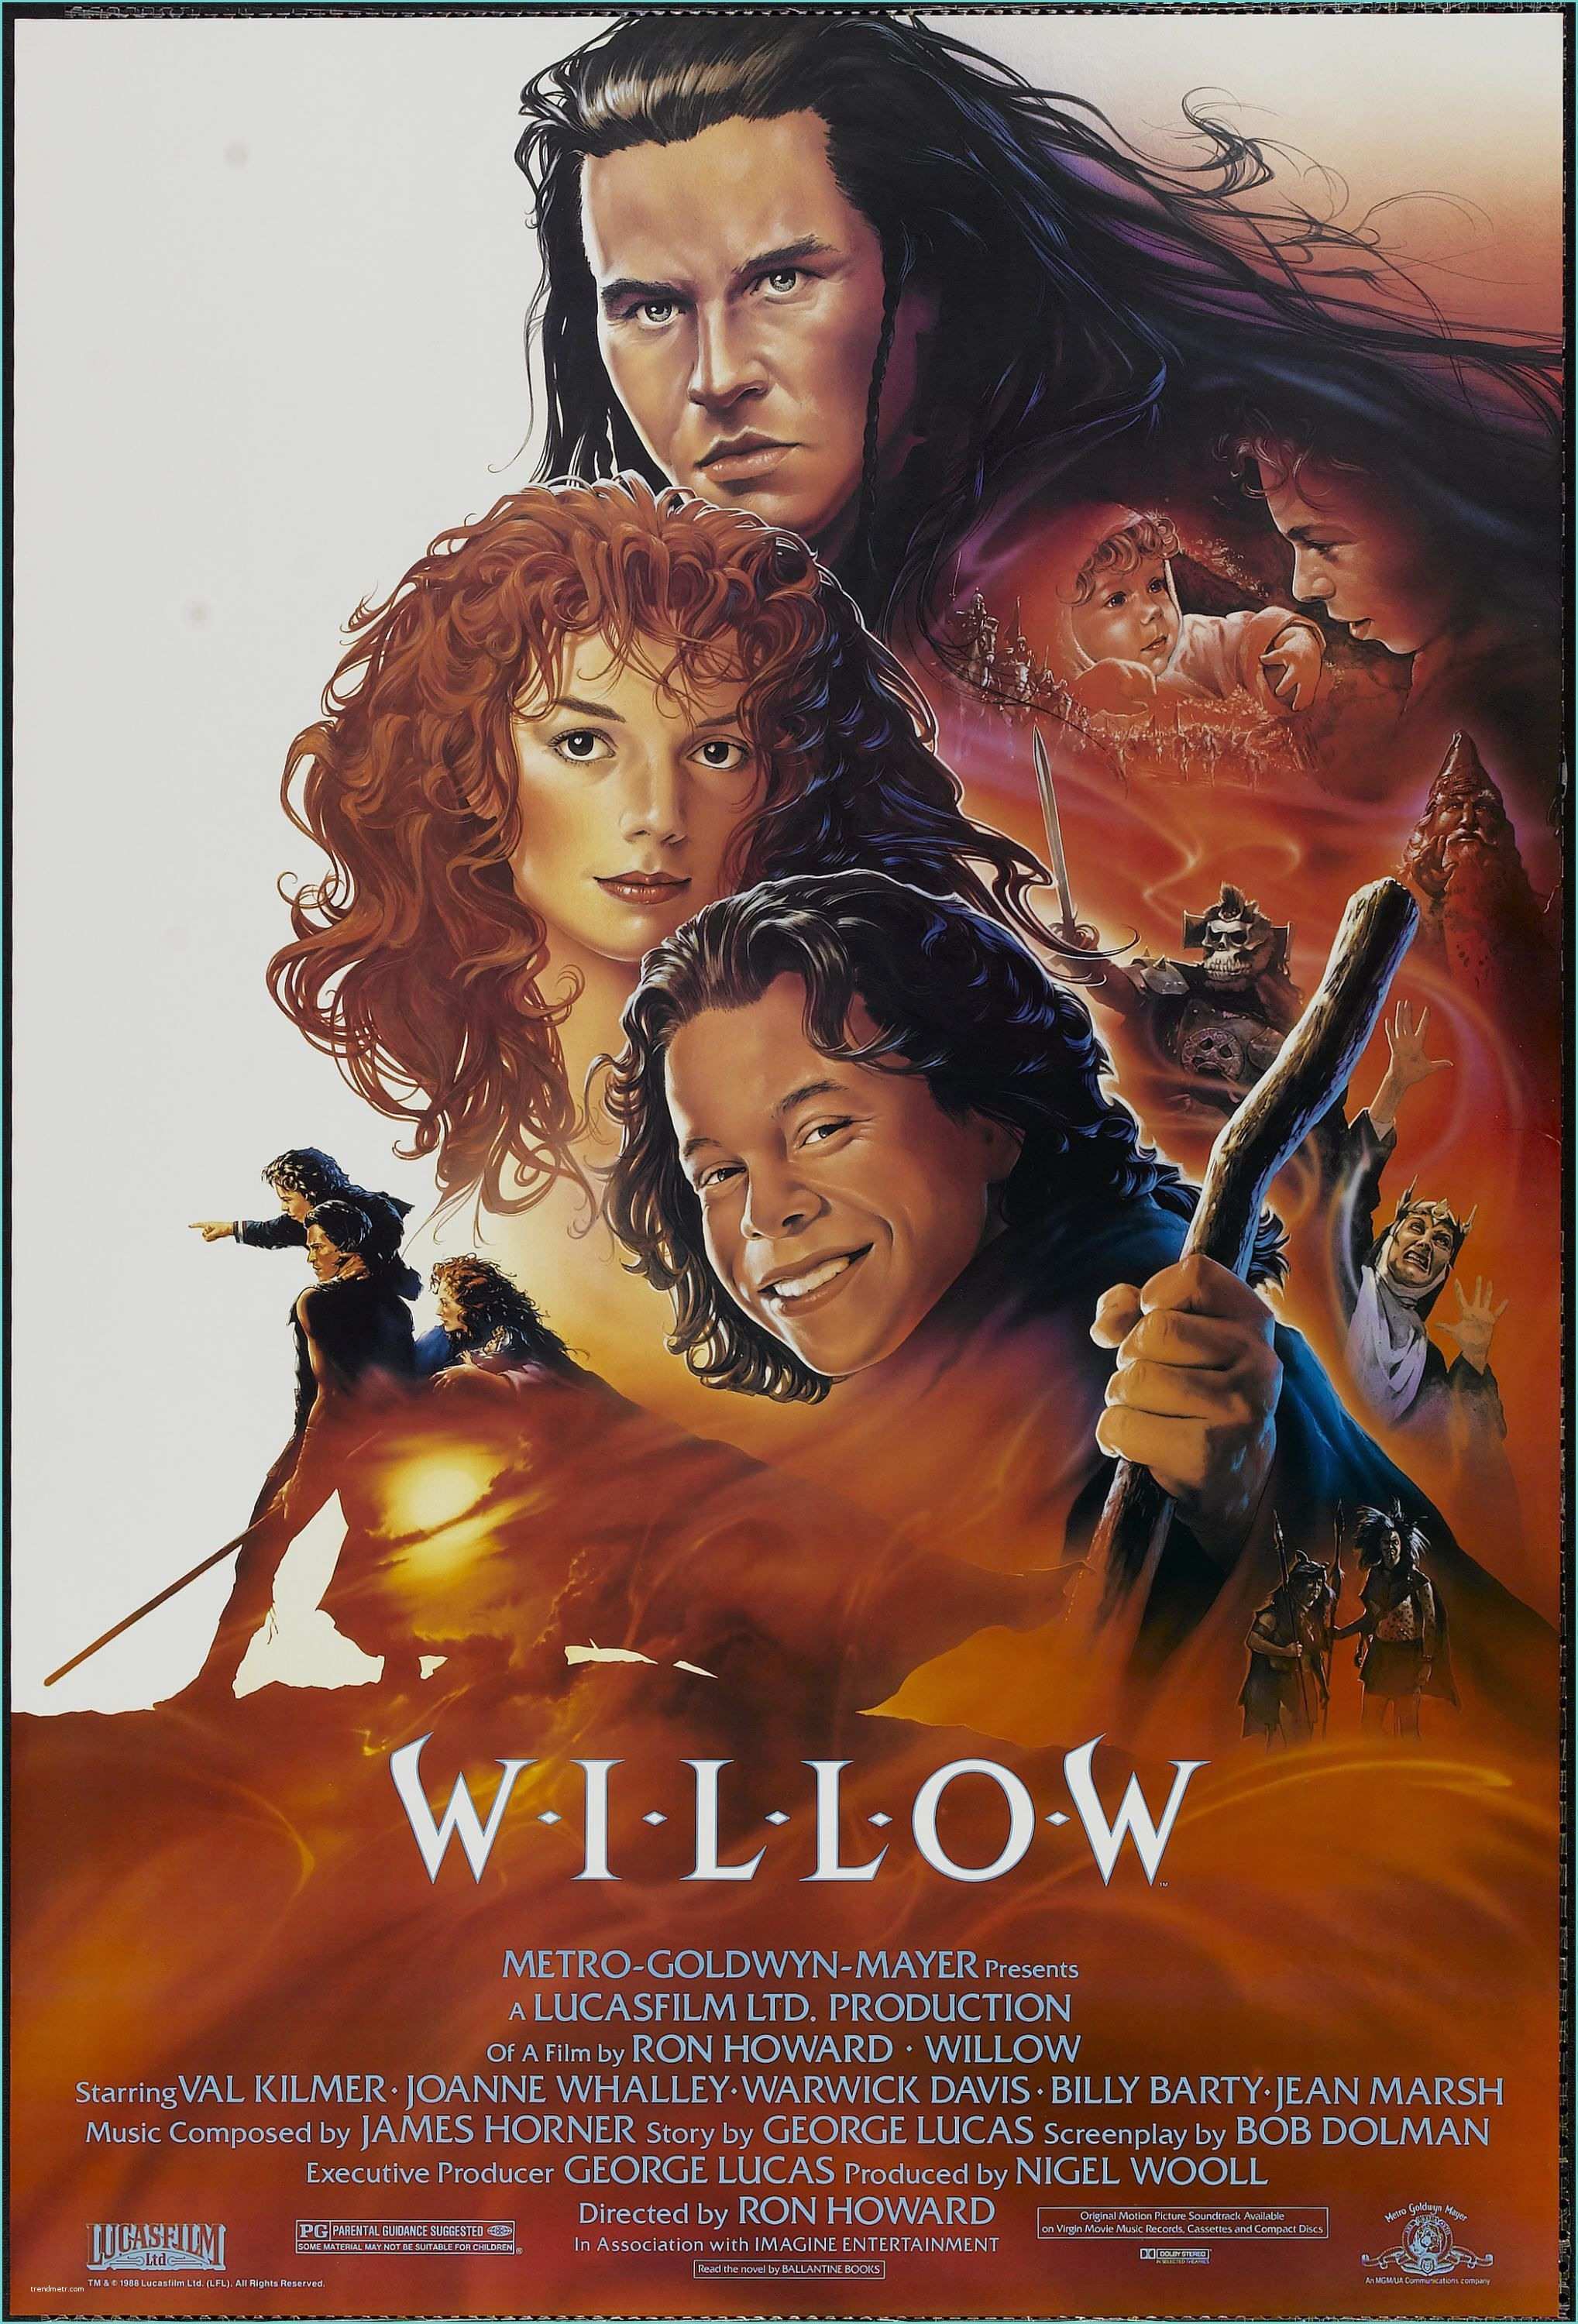 Allposters Return Policy Willow" 1988 Country United States Director Ron Howard